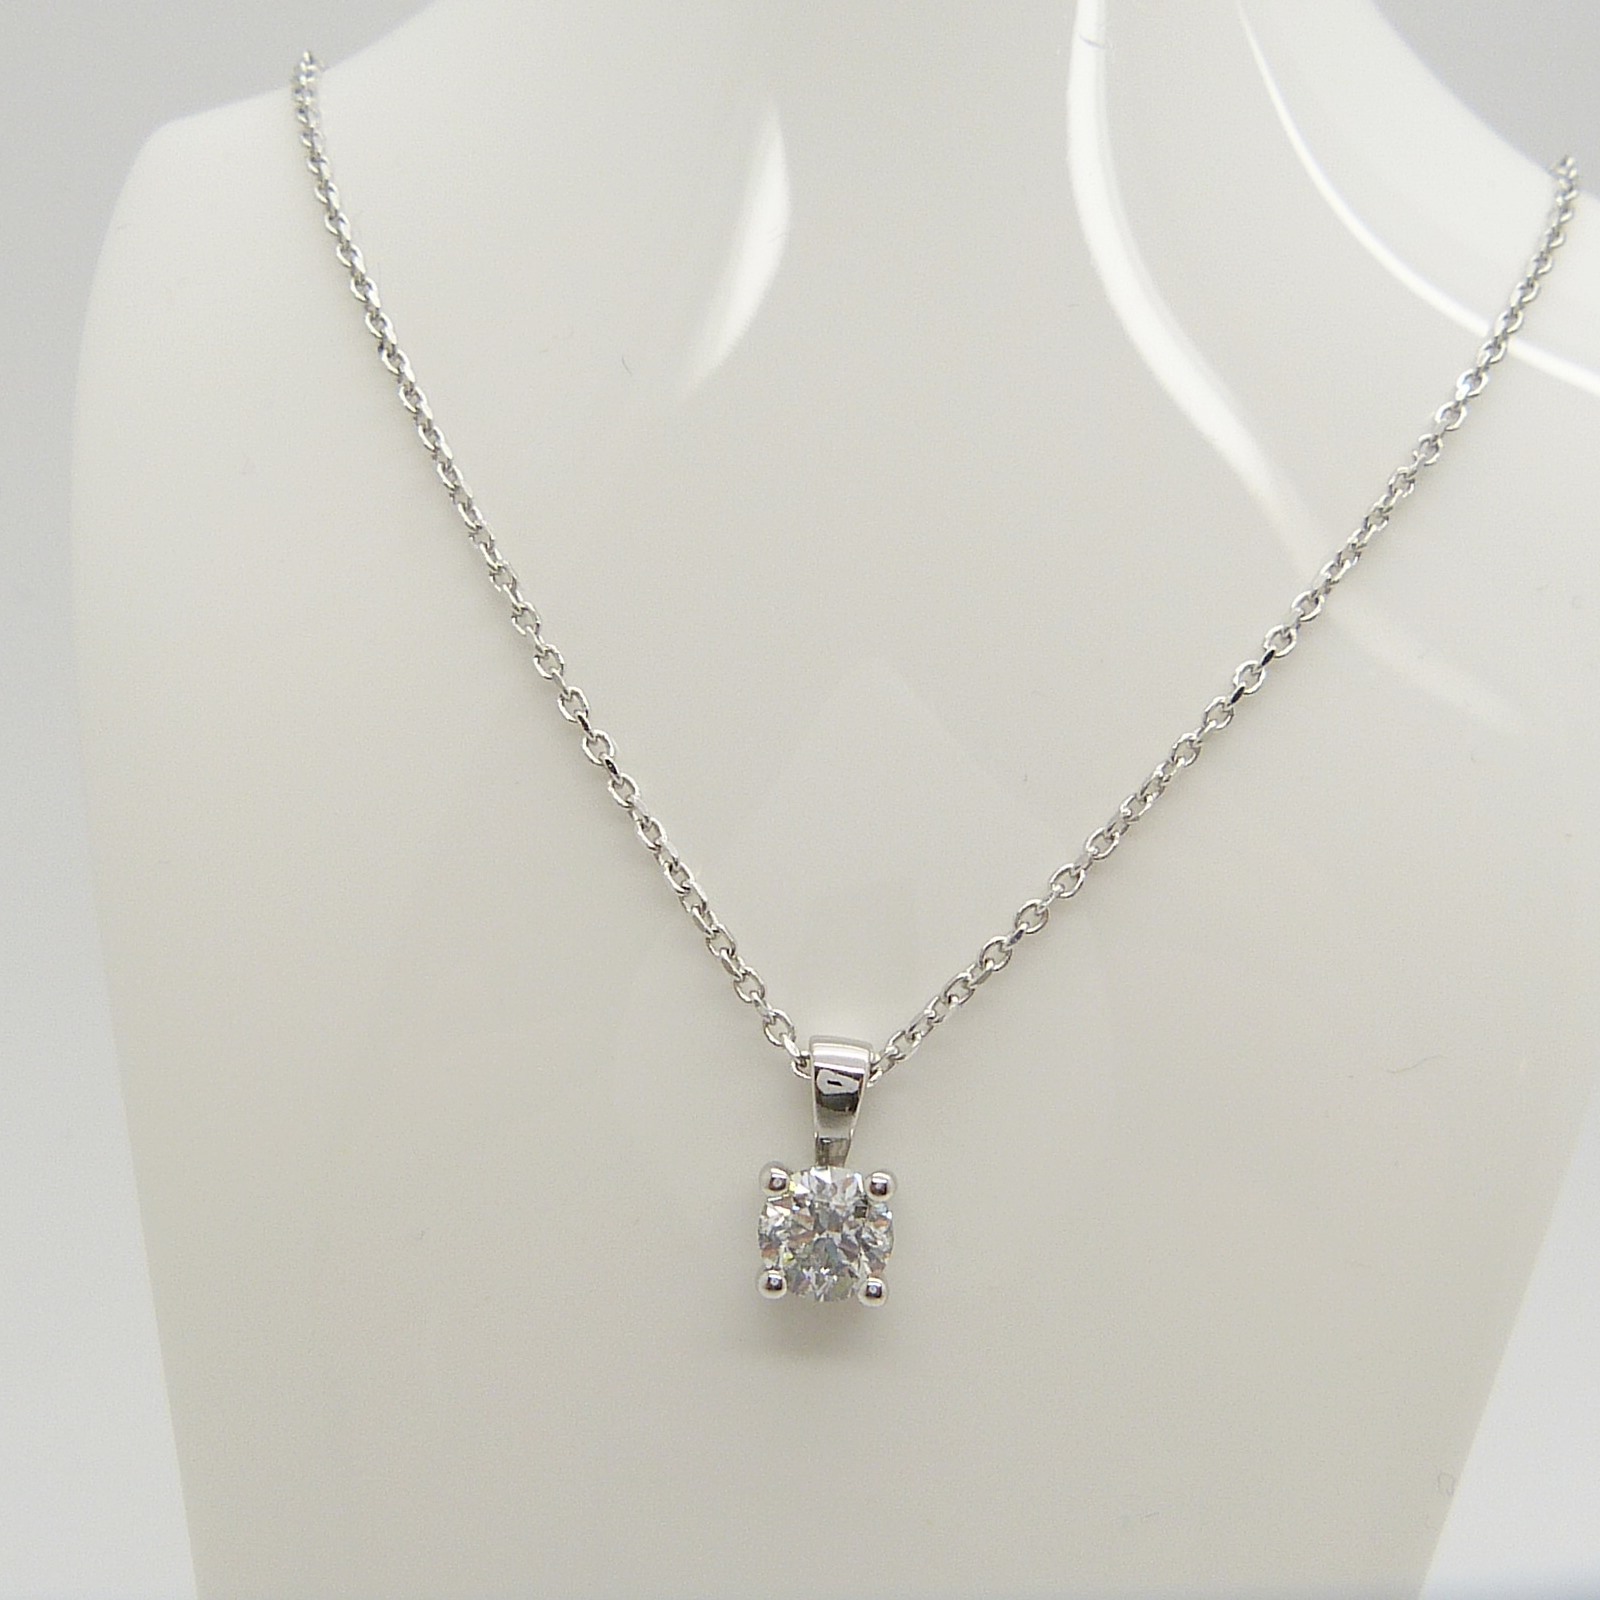 F-colour 0.51 carat diamond solitaire pendant and chain in 18ct white gold, with WGI certificate - Image 4 of 6